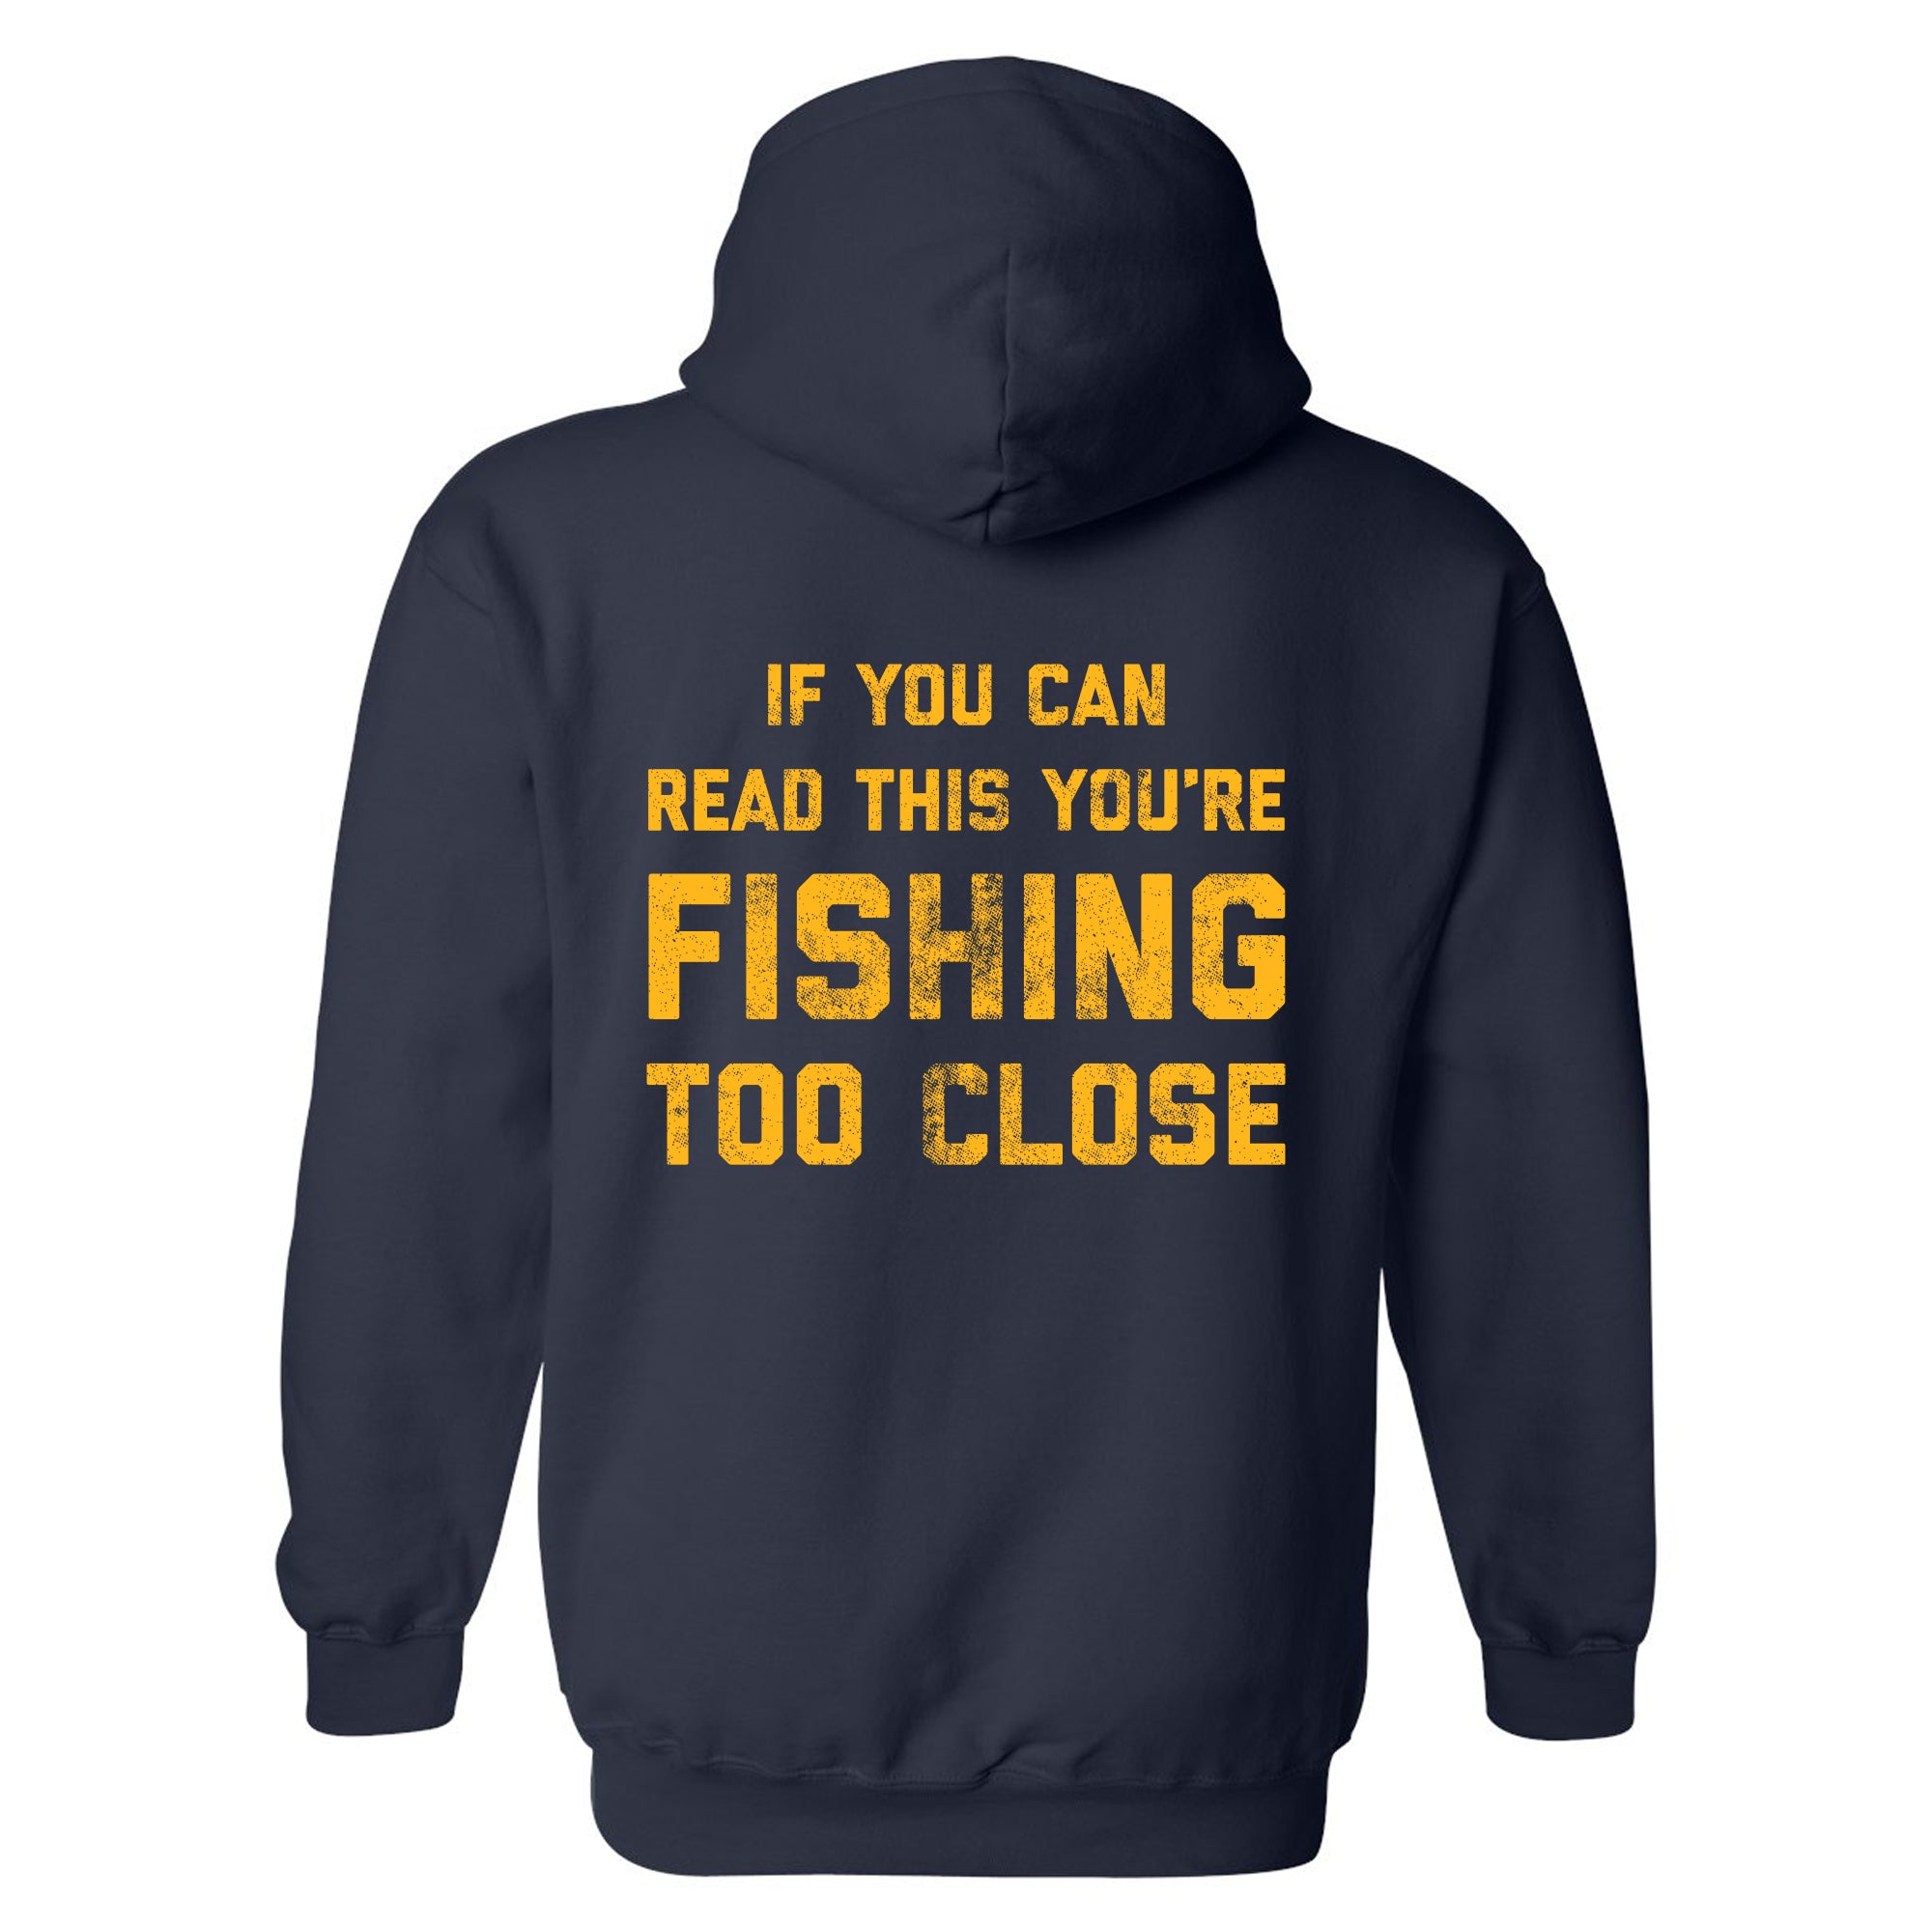 Funny Navy - Too Close If You Can Read This You're Fishing Too Close Hoodie Nerdy Fishing Tee